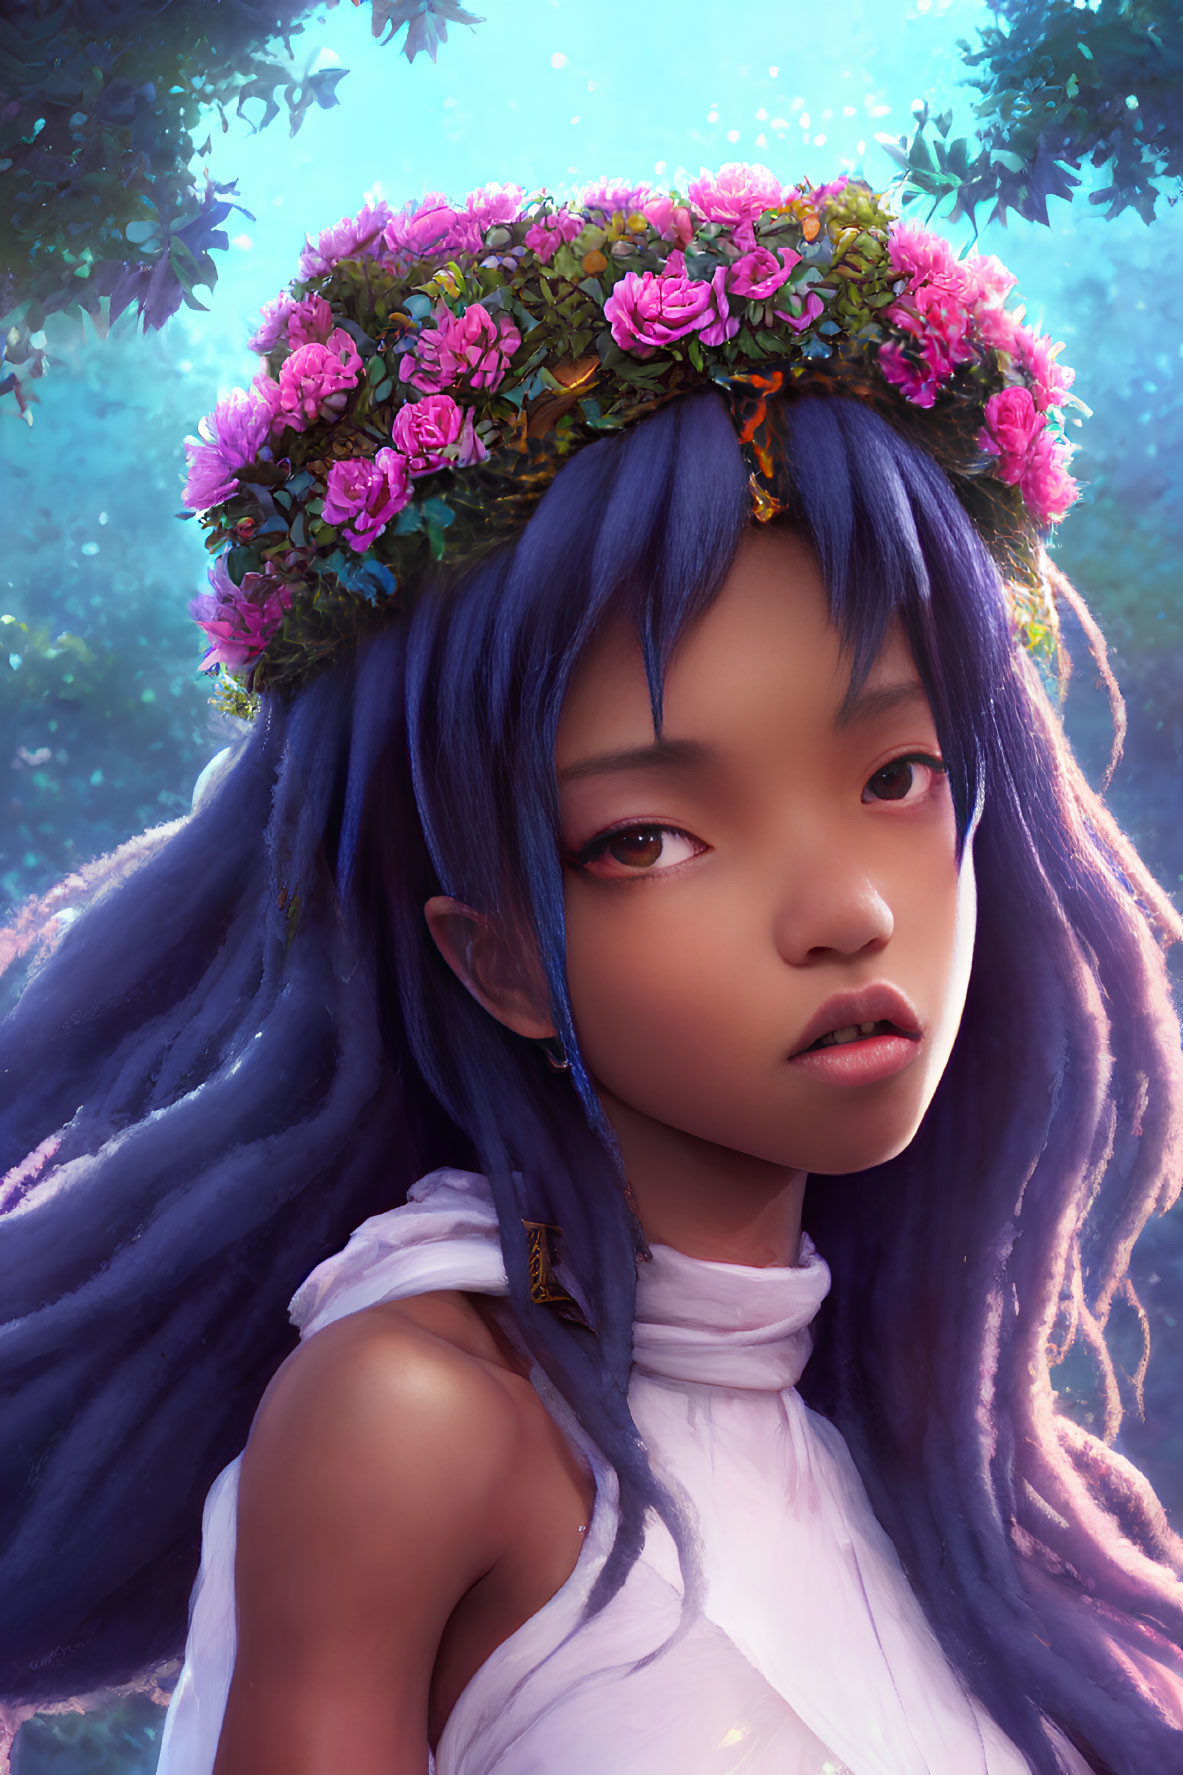 Whimsical character with blue hair and flower wreath in mystical forest